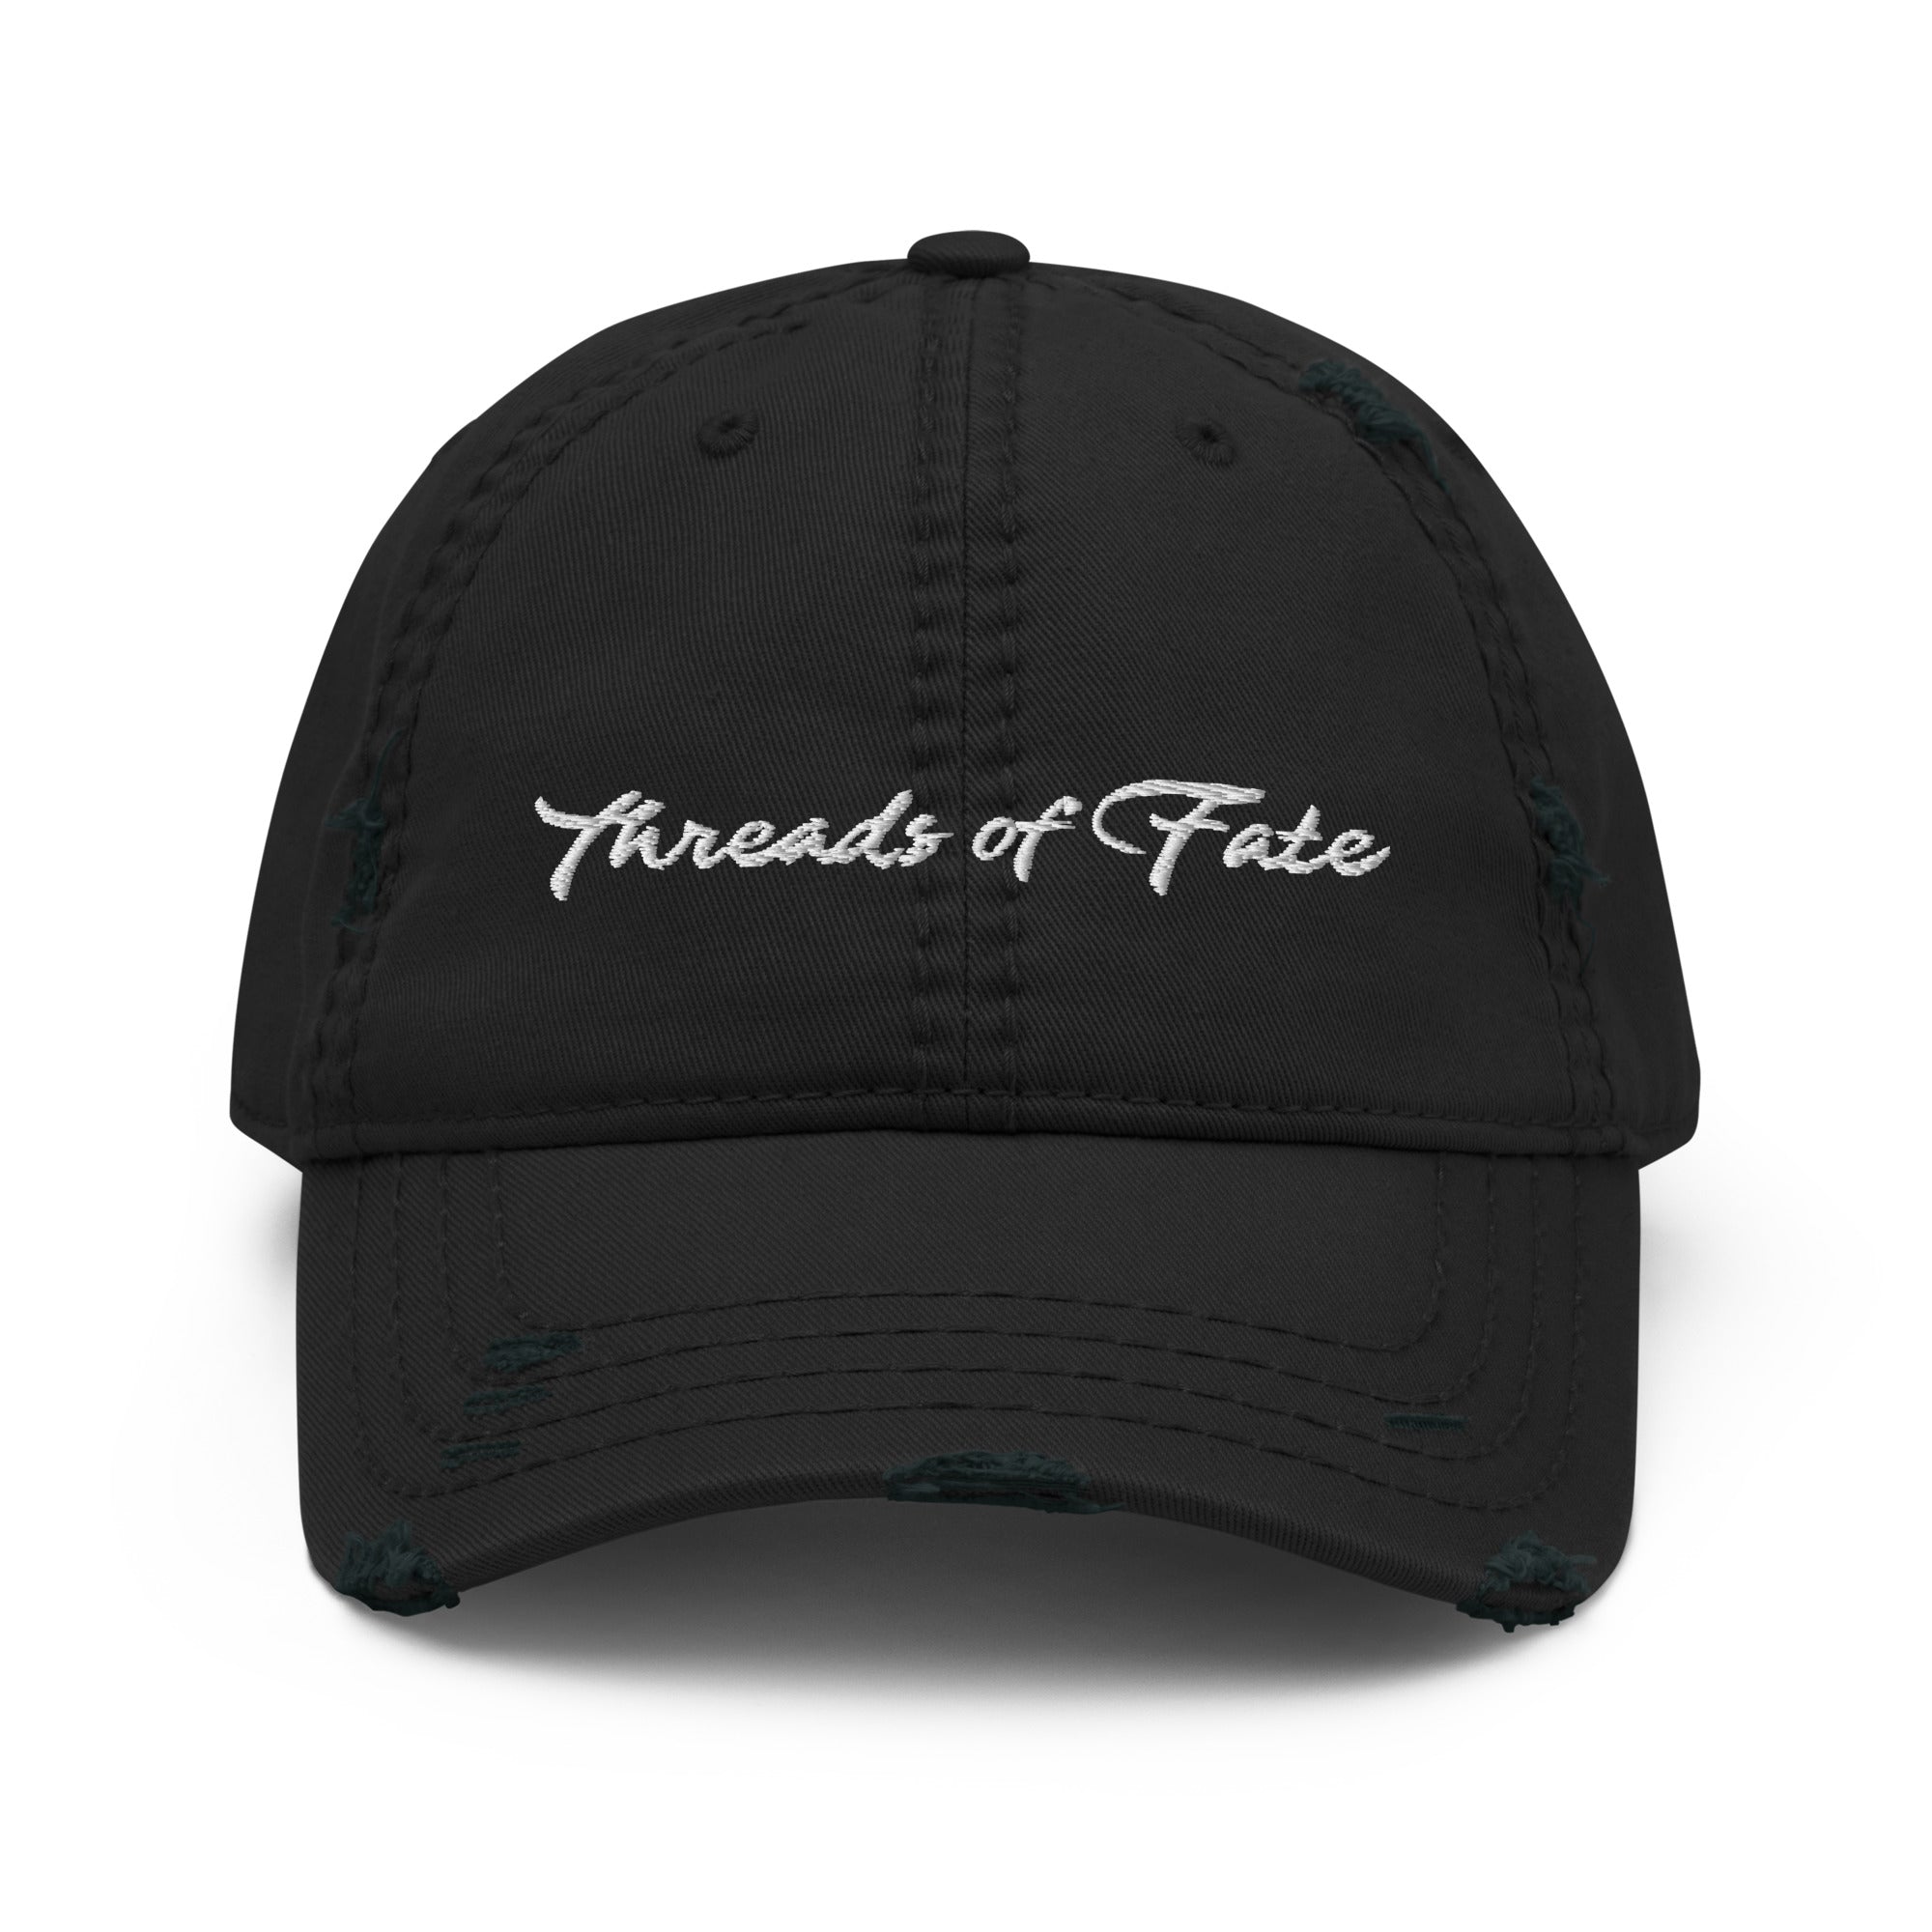 Threads of Fate Distressed Dad Hat